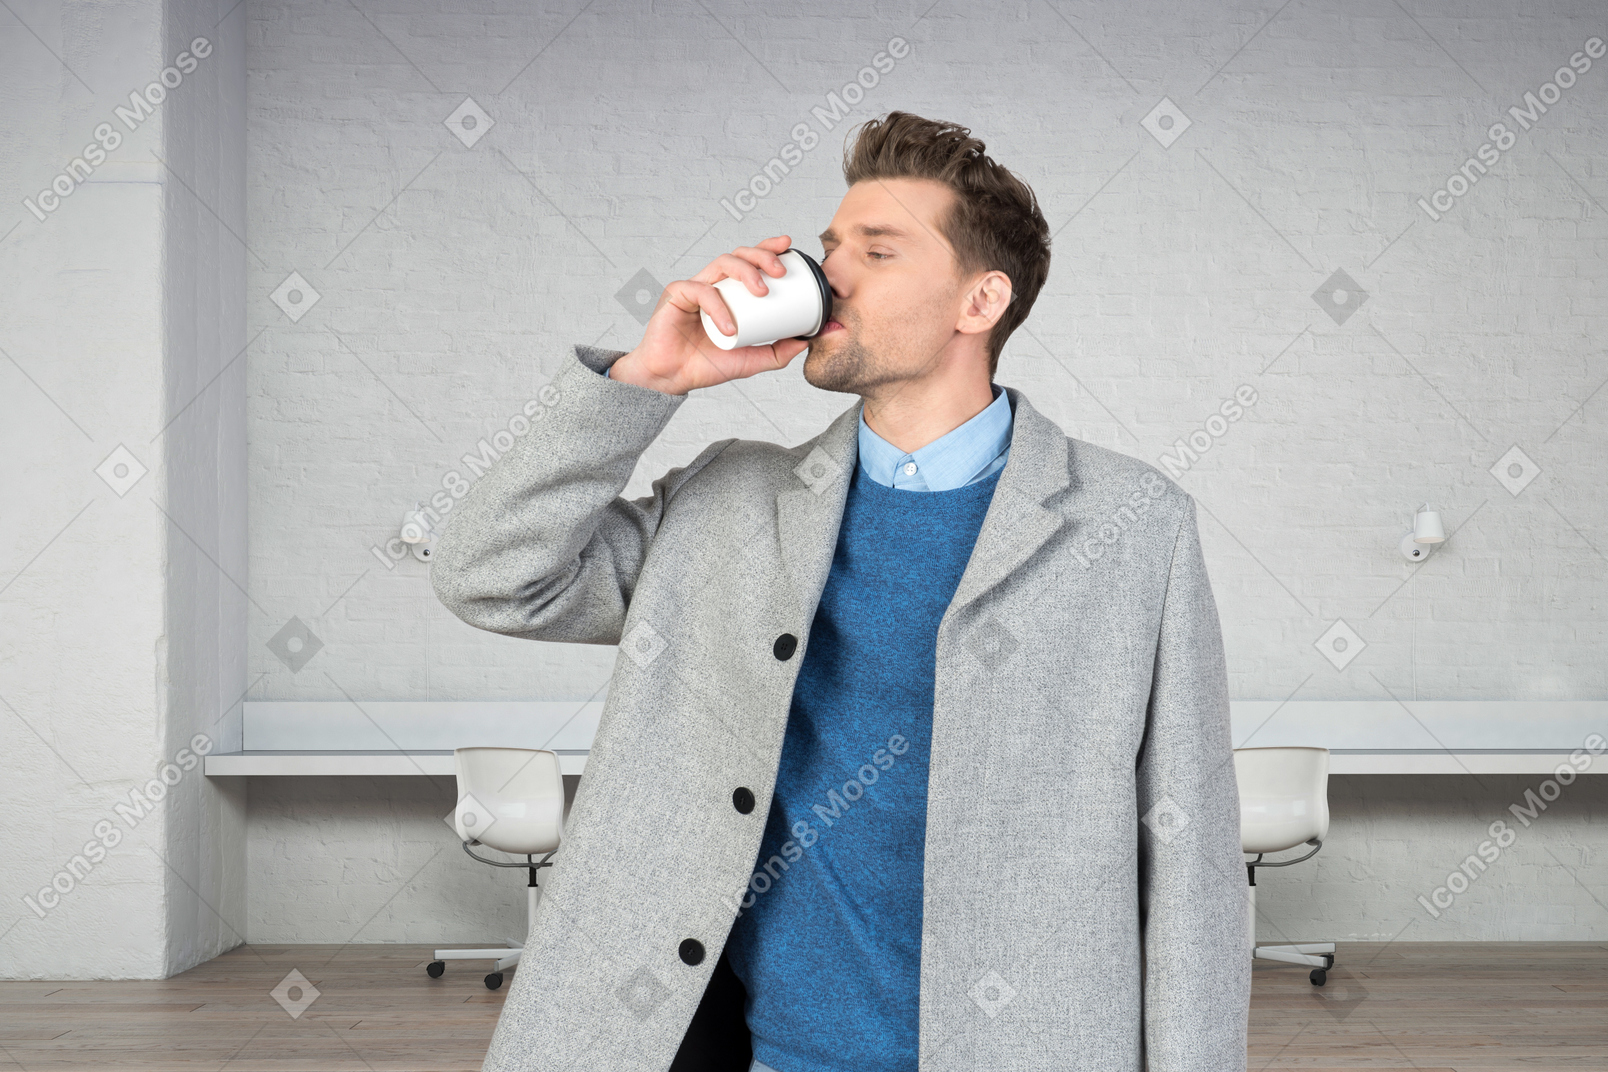 A man drinking a coffee in an office